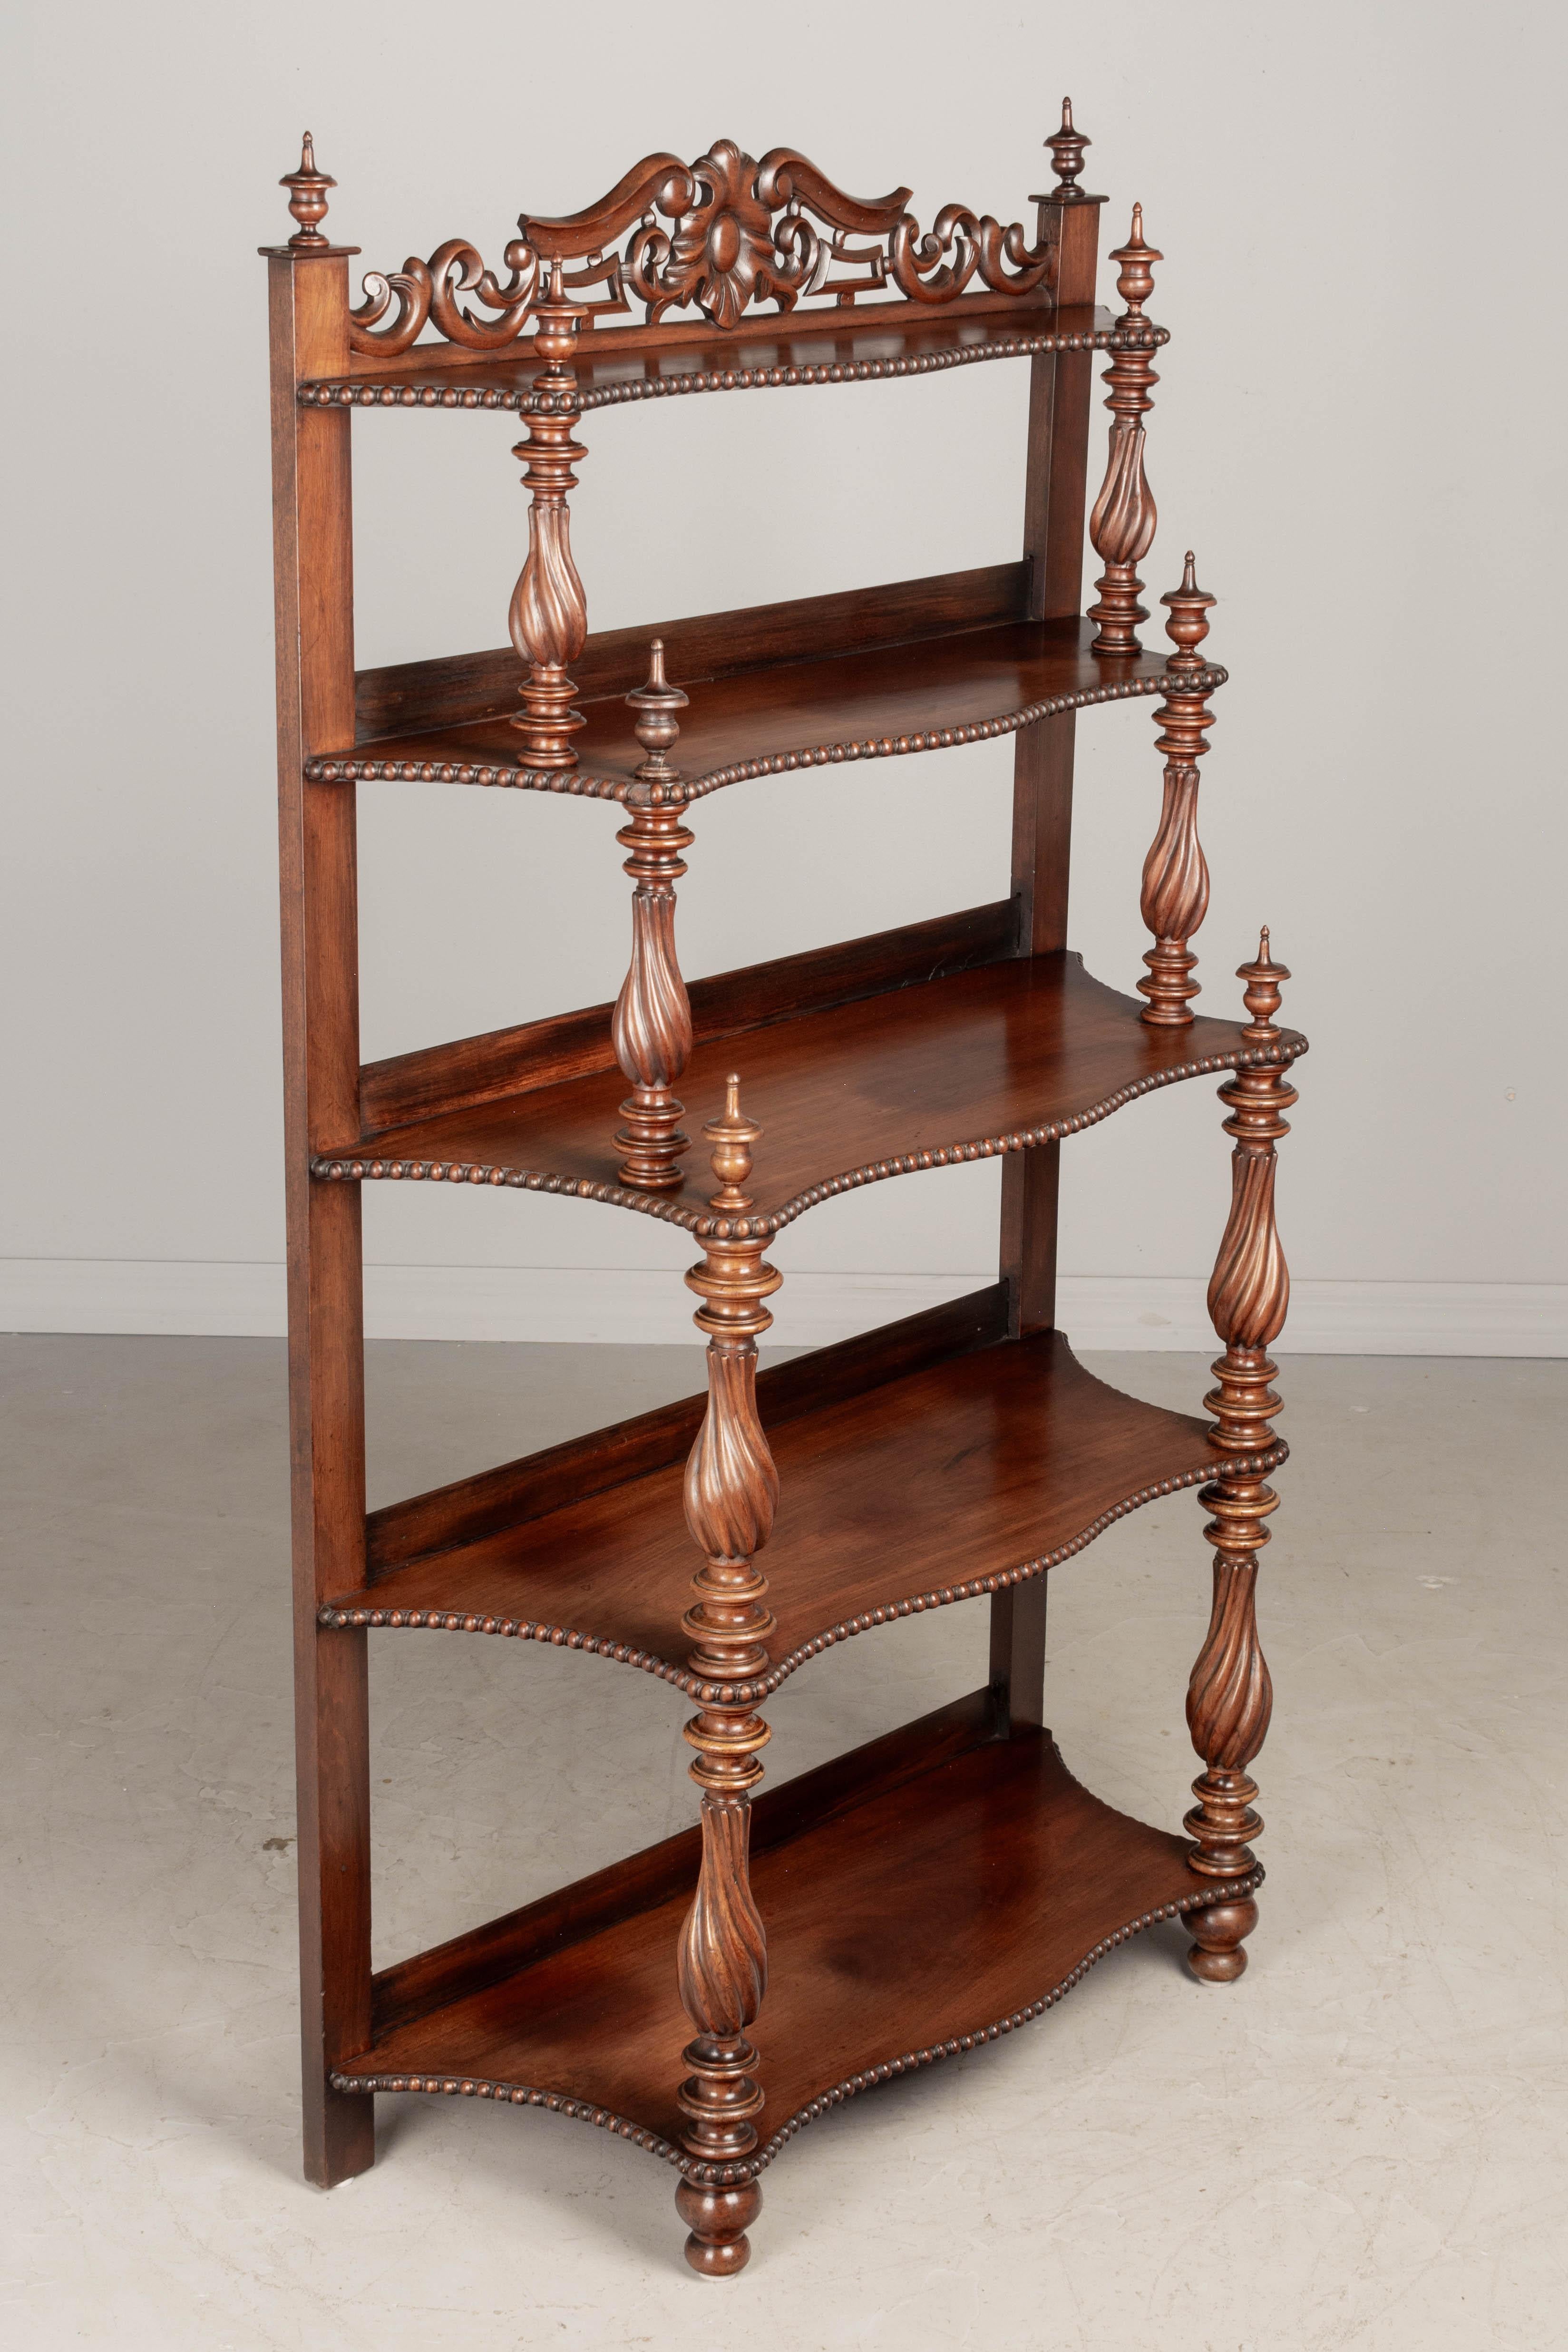 A 19th century French Louis Philippe étagère, or tiered shelf, made of solid mahogany, finished on all sides and retaining a nice luster. Shaped shelves with bead trim supported by turned columns with finials. Decorative carved crown. Fine turning.